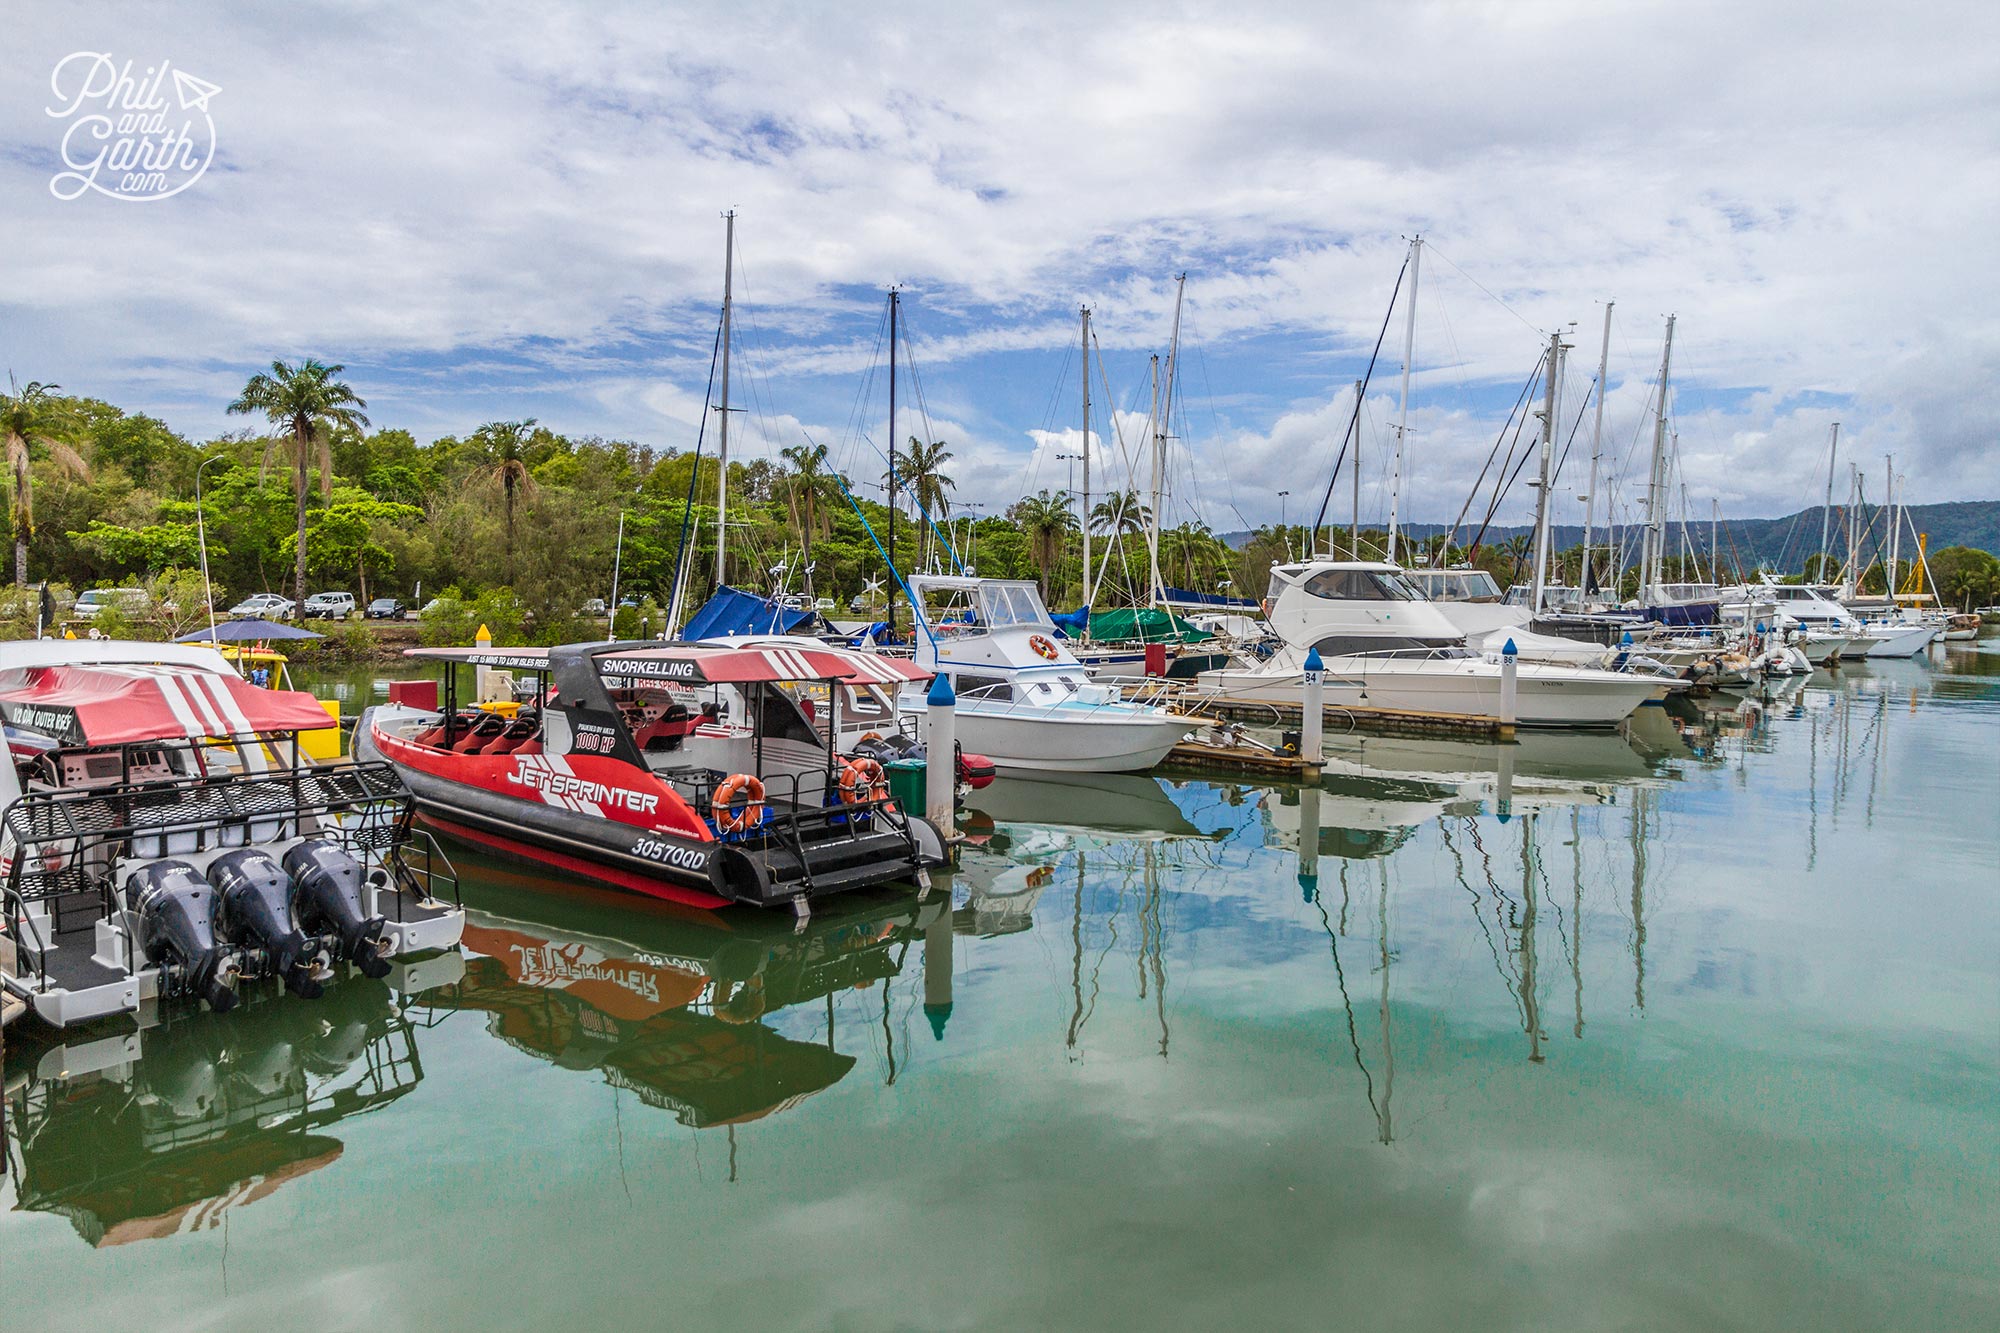 Port Douglas marina is the gateway to the Great Barrier Reef